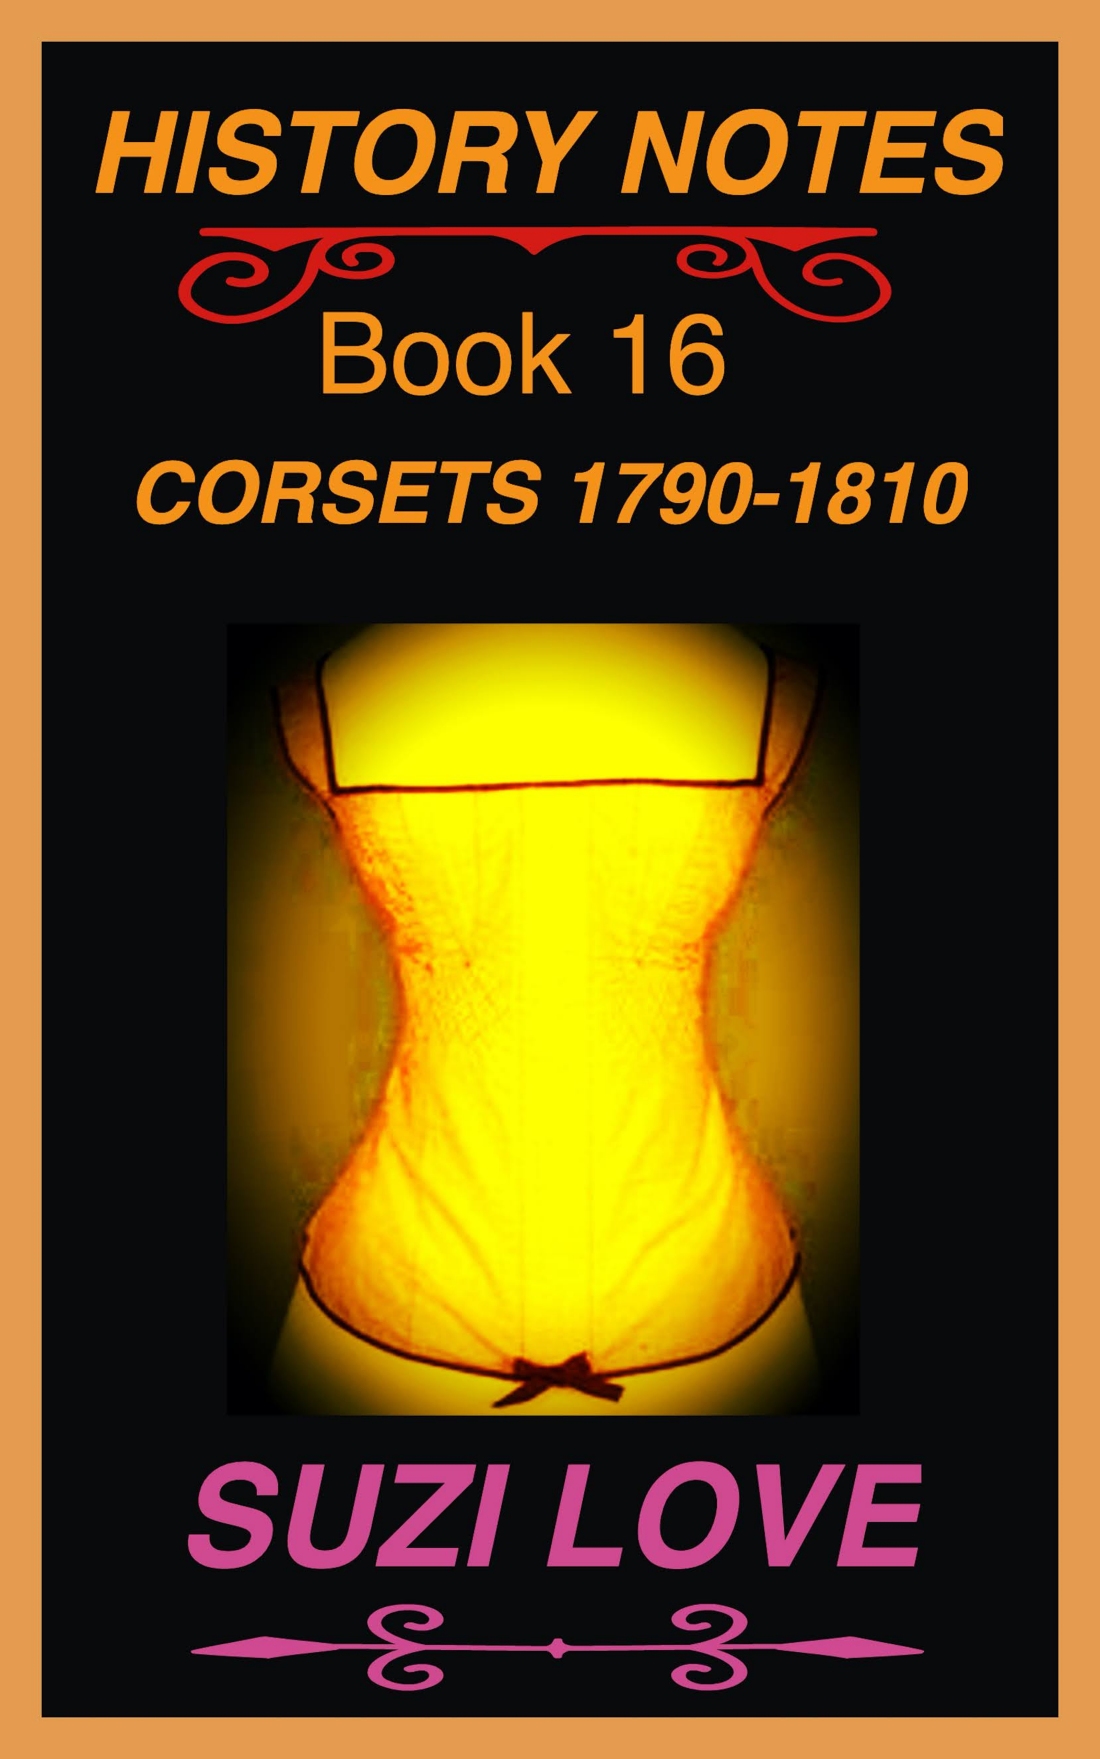 Corsets 1790-1810 History Notes Book 16 This book shows how supporting underclothing moved away from stomachers and tightly laced stays worn during the 1700s and transitioned into corsets that were less formed and far more comfortable. Wearing the correct underclothing was essential for keeping garments in place and giving the best fashion display. Corsets worn during Jane Austen's lifetime. Corsets or stays transitioning from 1700s into 1800s and worn during Jane Austen's lifetime. https://books2read.com/SuziLoveCorsetBook16